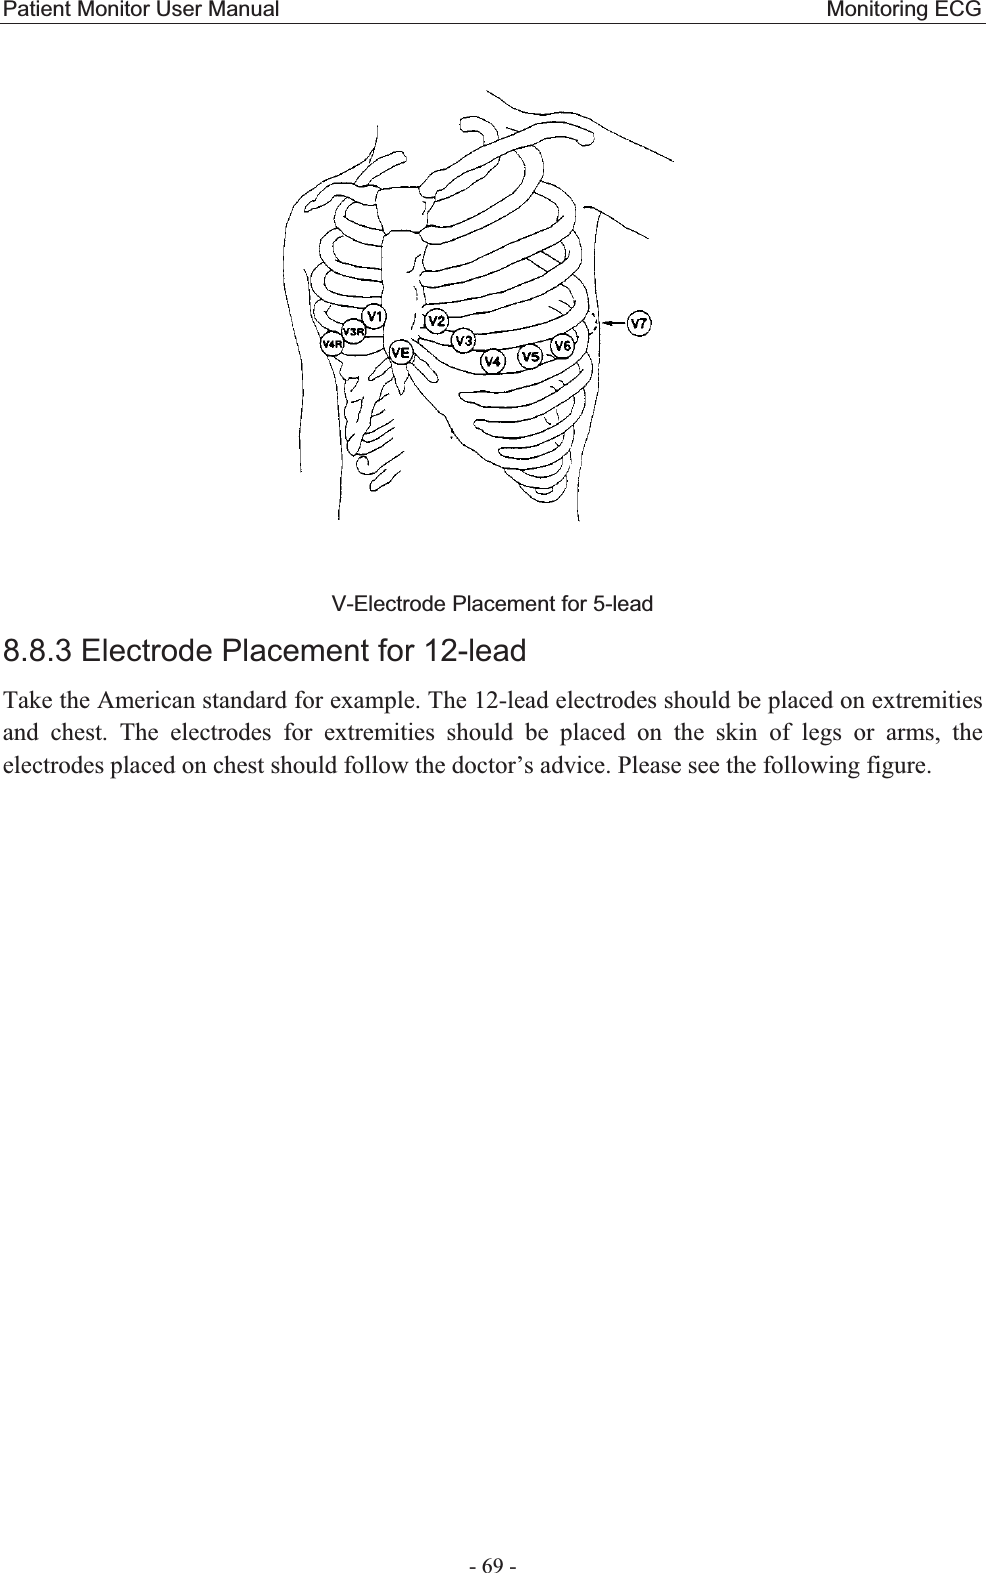 Patient Monitor User Manual                                                  Monitoring ECG  - 69 - V-Electrode Placement for 5-lead   8.8.3 Electrode Placement for 12-leadTake the American standard for example. The 12-lead electrodes should be placed on extremities and chest. The electrodes for extremities should be placed on the skin of legs or arms, the electrodes placed on chest should follow the doctor’s advice. Please see the following figure.